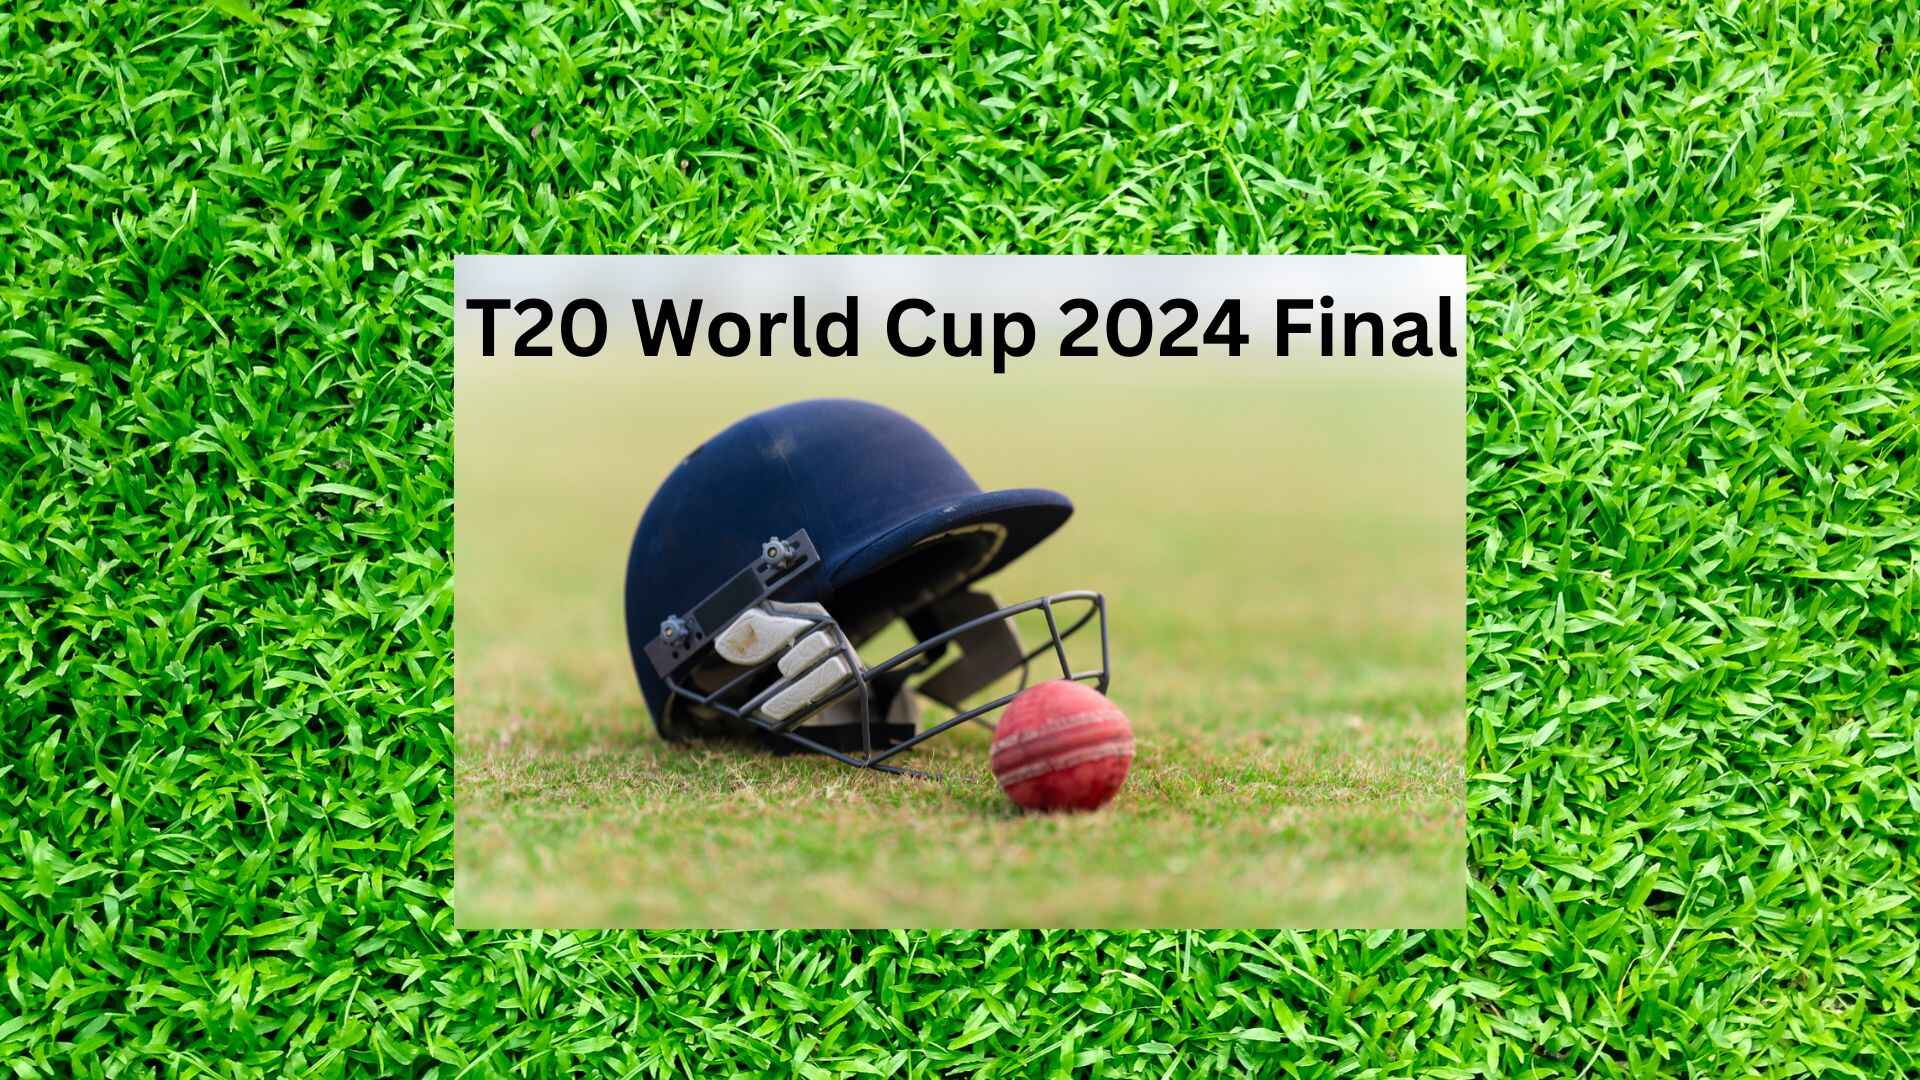 T20 World Cup 2024 Final: Axar Patel’s Batting Past a Reference in Completing India’s Existence Cup Drought